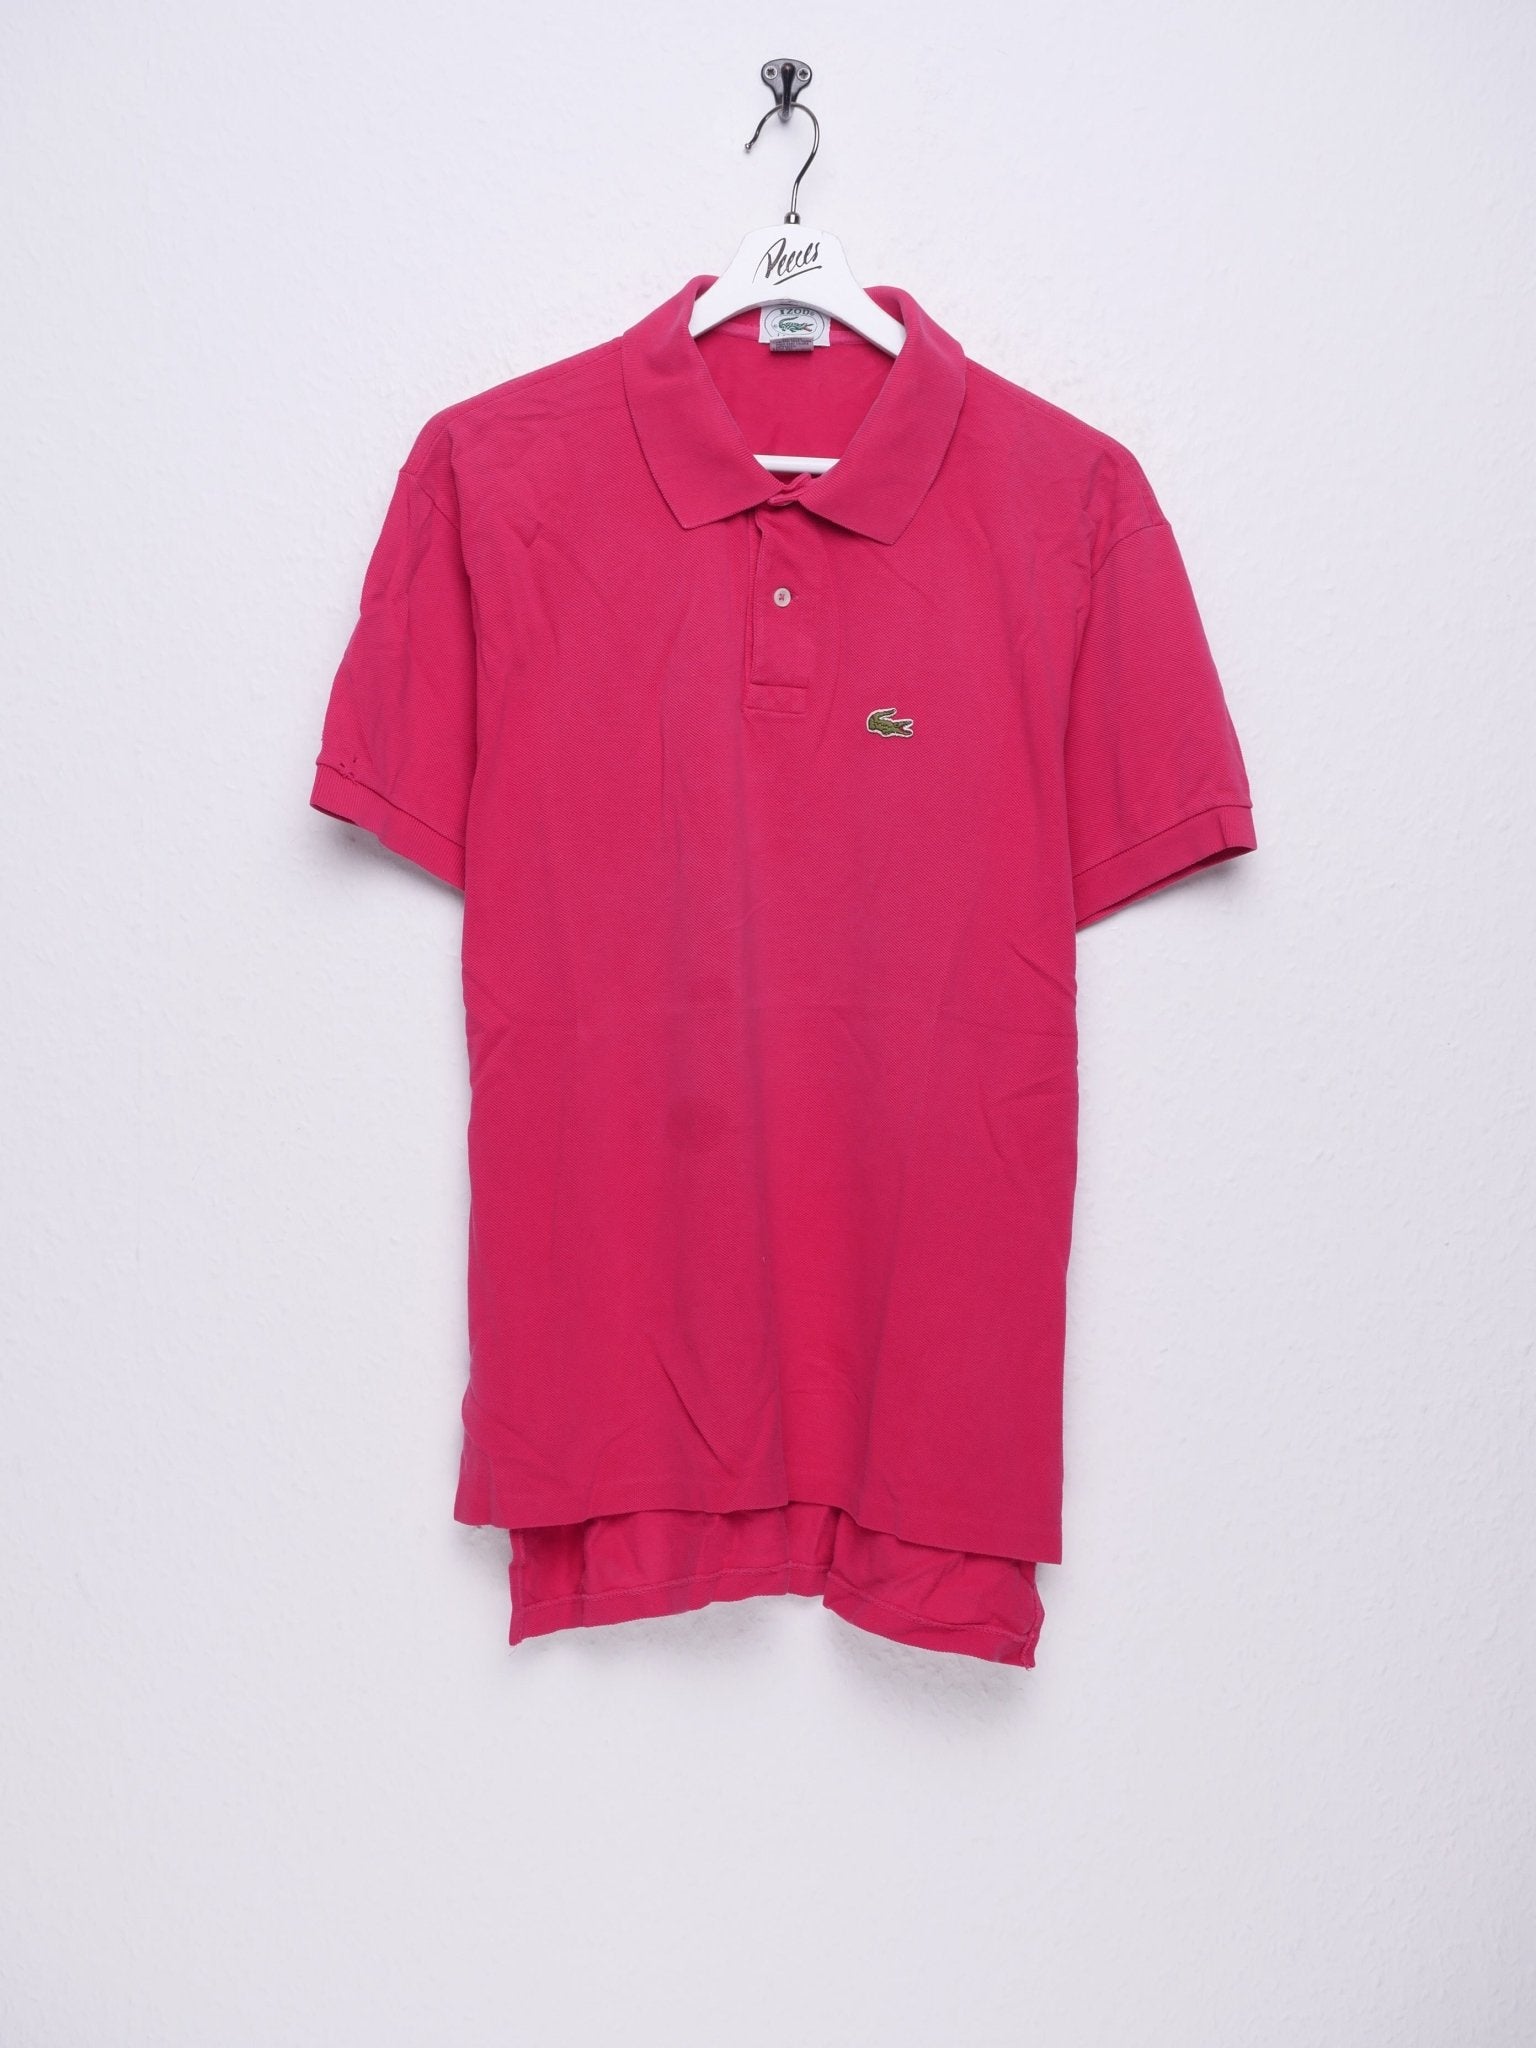 Lacoste patched Logo pink Polo Shirt - Peeces